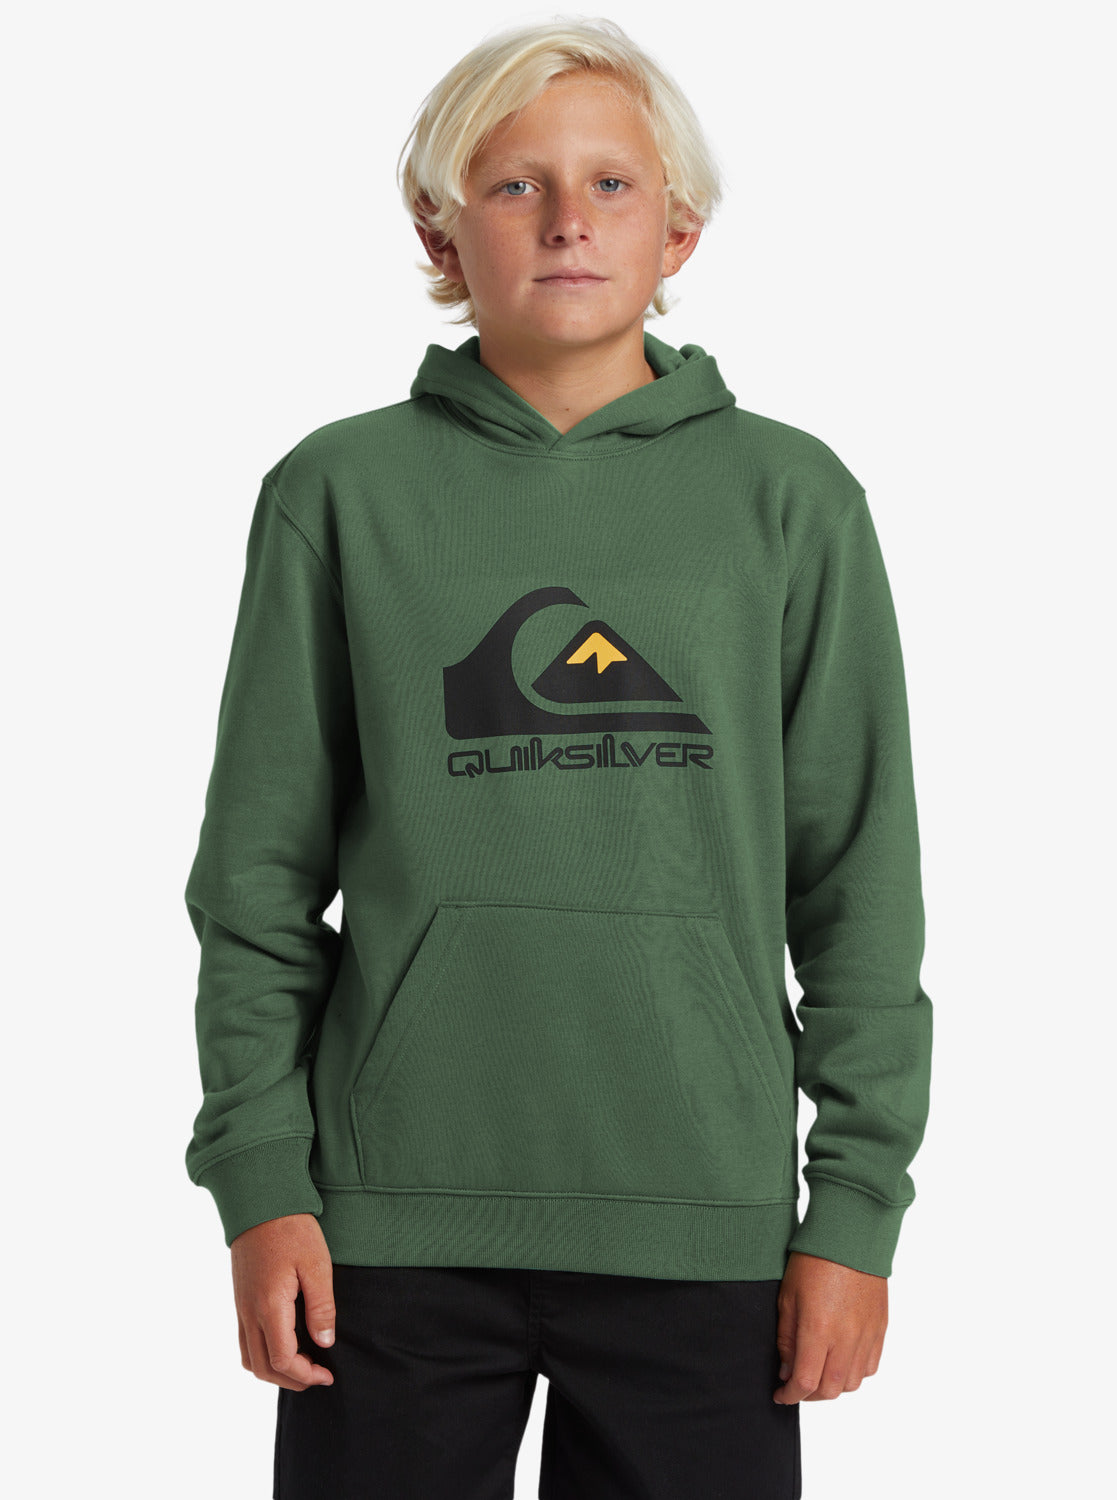 Quiksilver Big Logo Boys Pullover Hoodie in Frosty Spruce